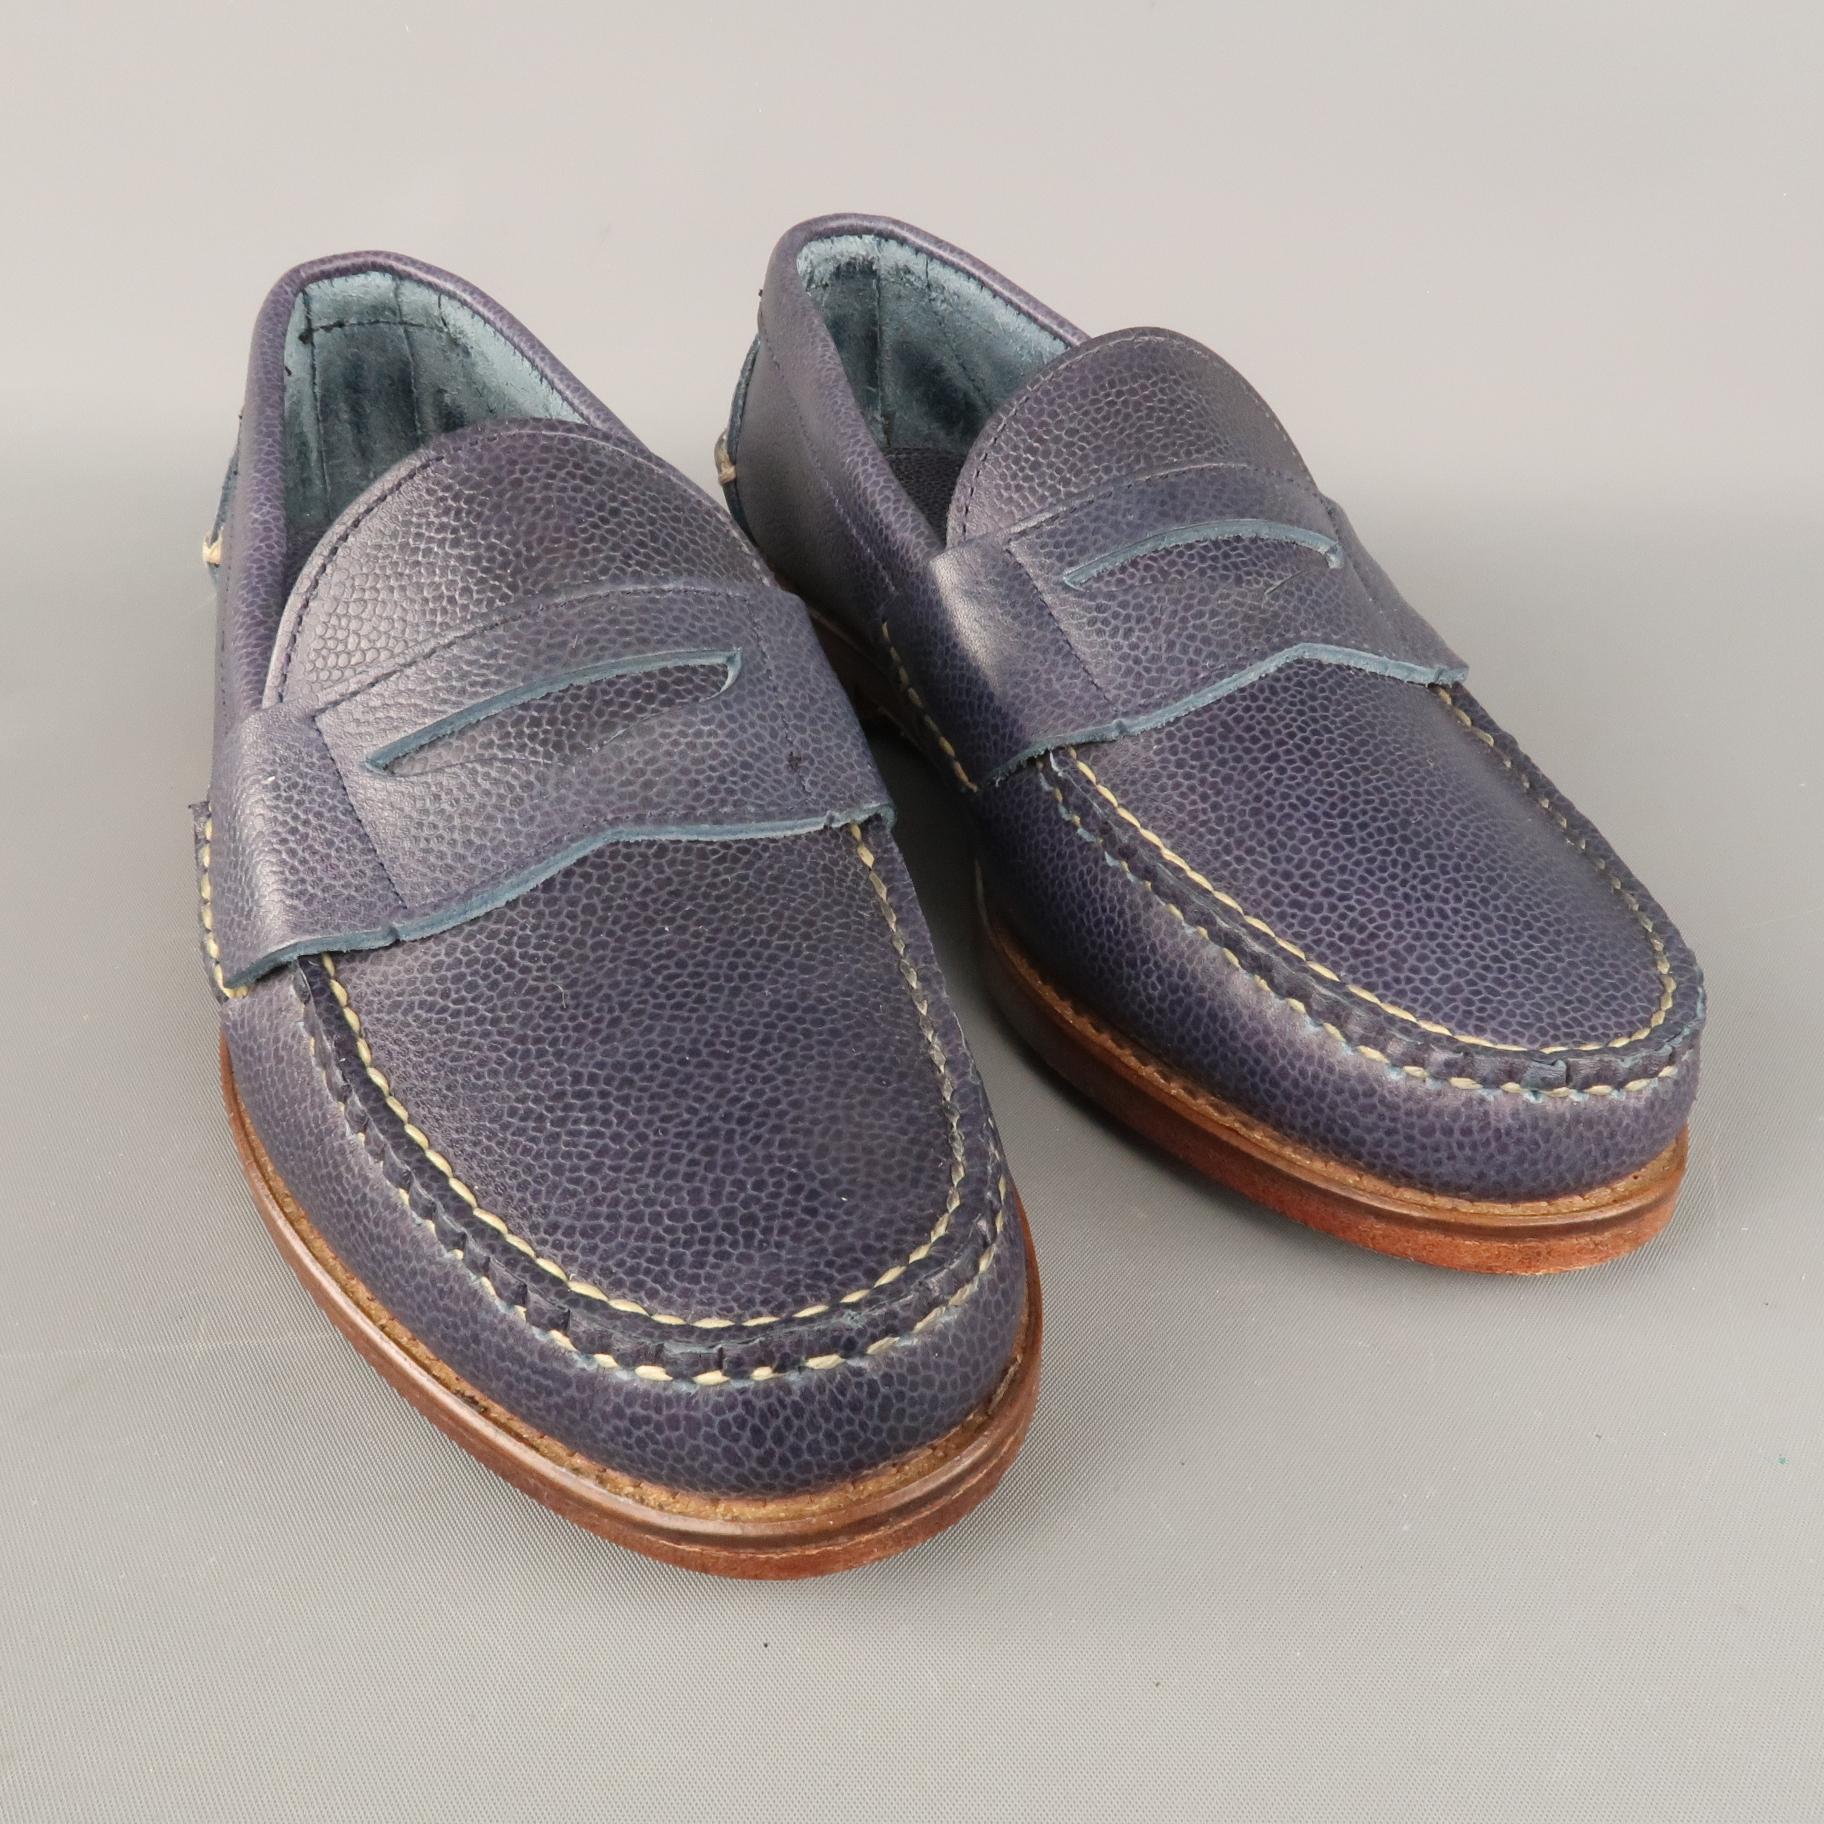 RALPH LAUREN Eltham II Country Grain loafer comes in a navy textured leather featuring a penny strap style, contrast stitching, and a wooden sole. Includes Box and Dust bags. Made in USA.

Excellent Pre-Owned